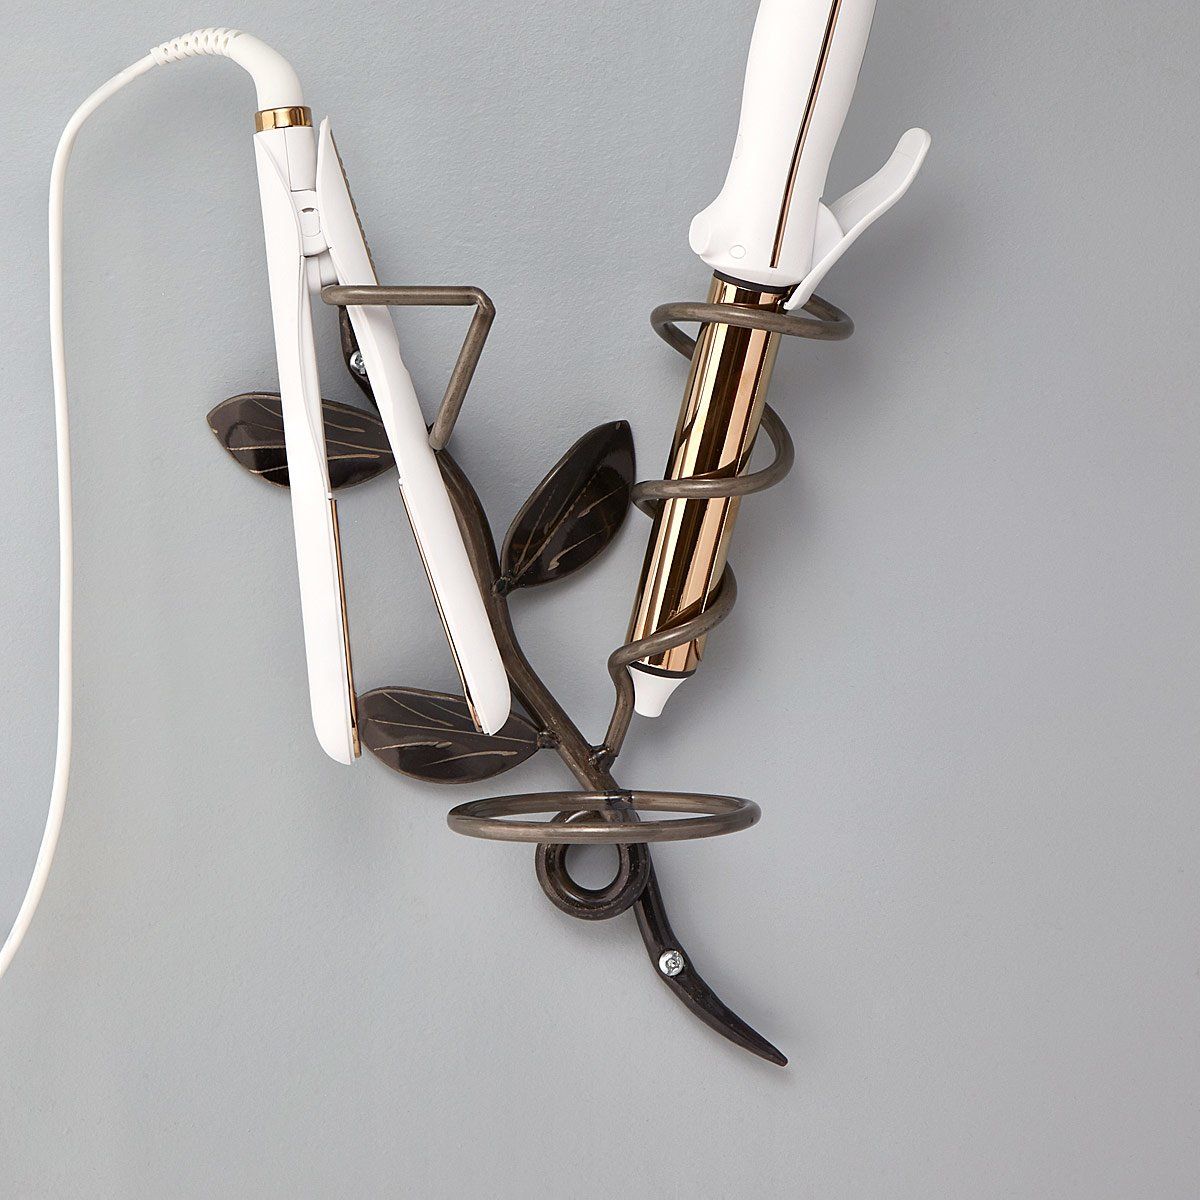 Hair Care Holder | UncommonGoods